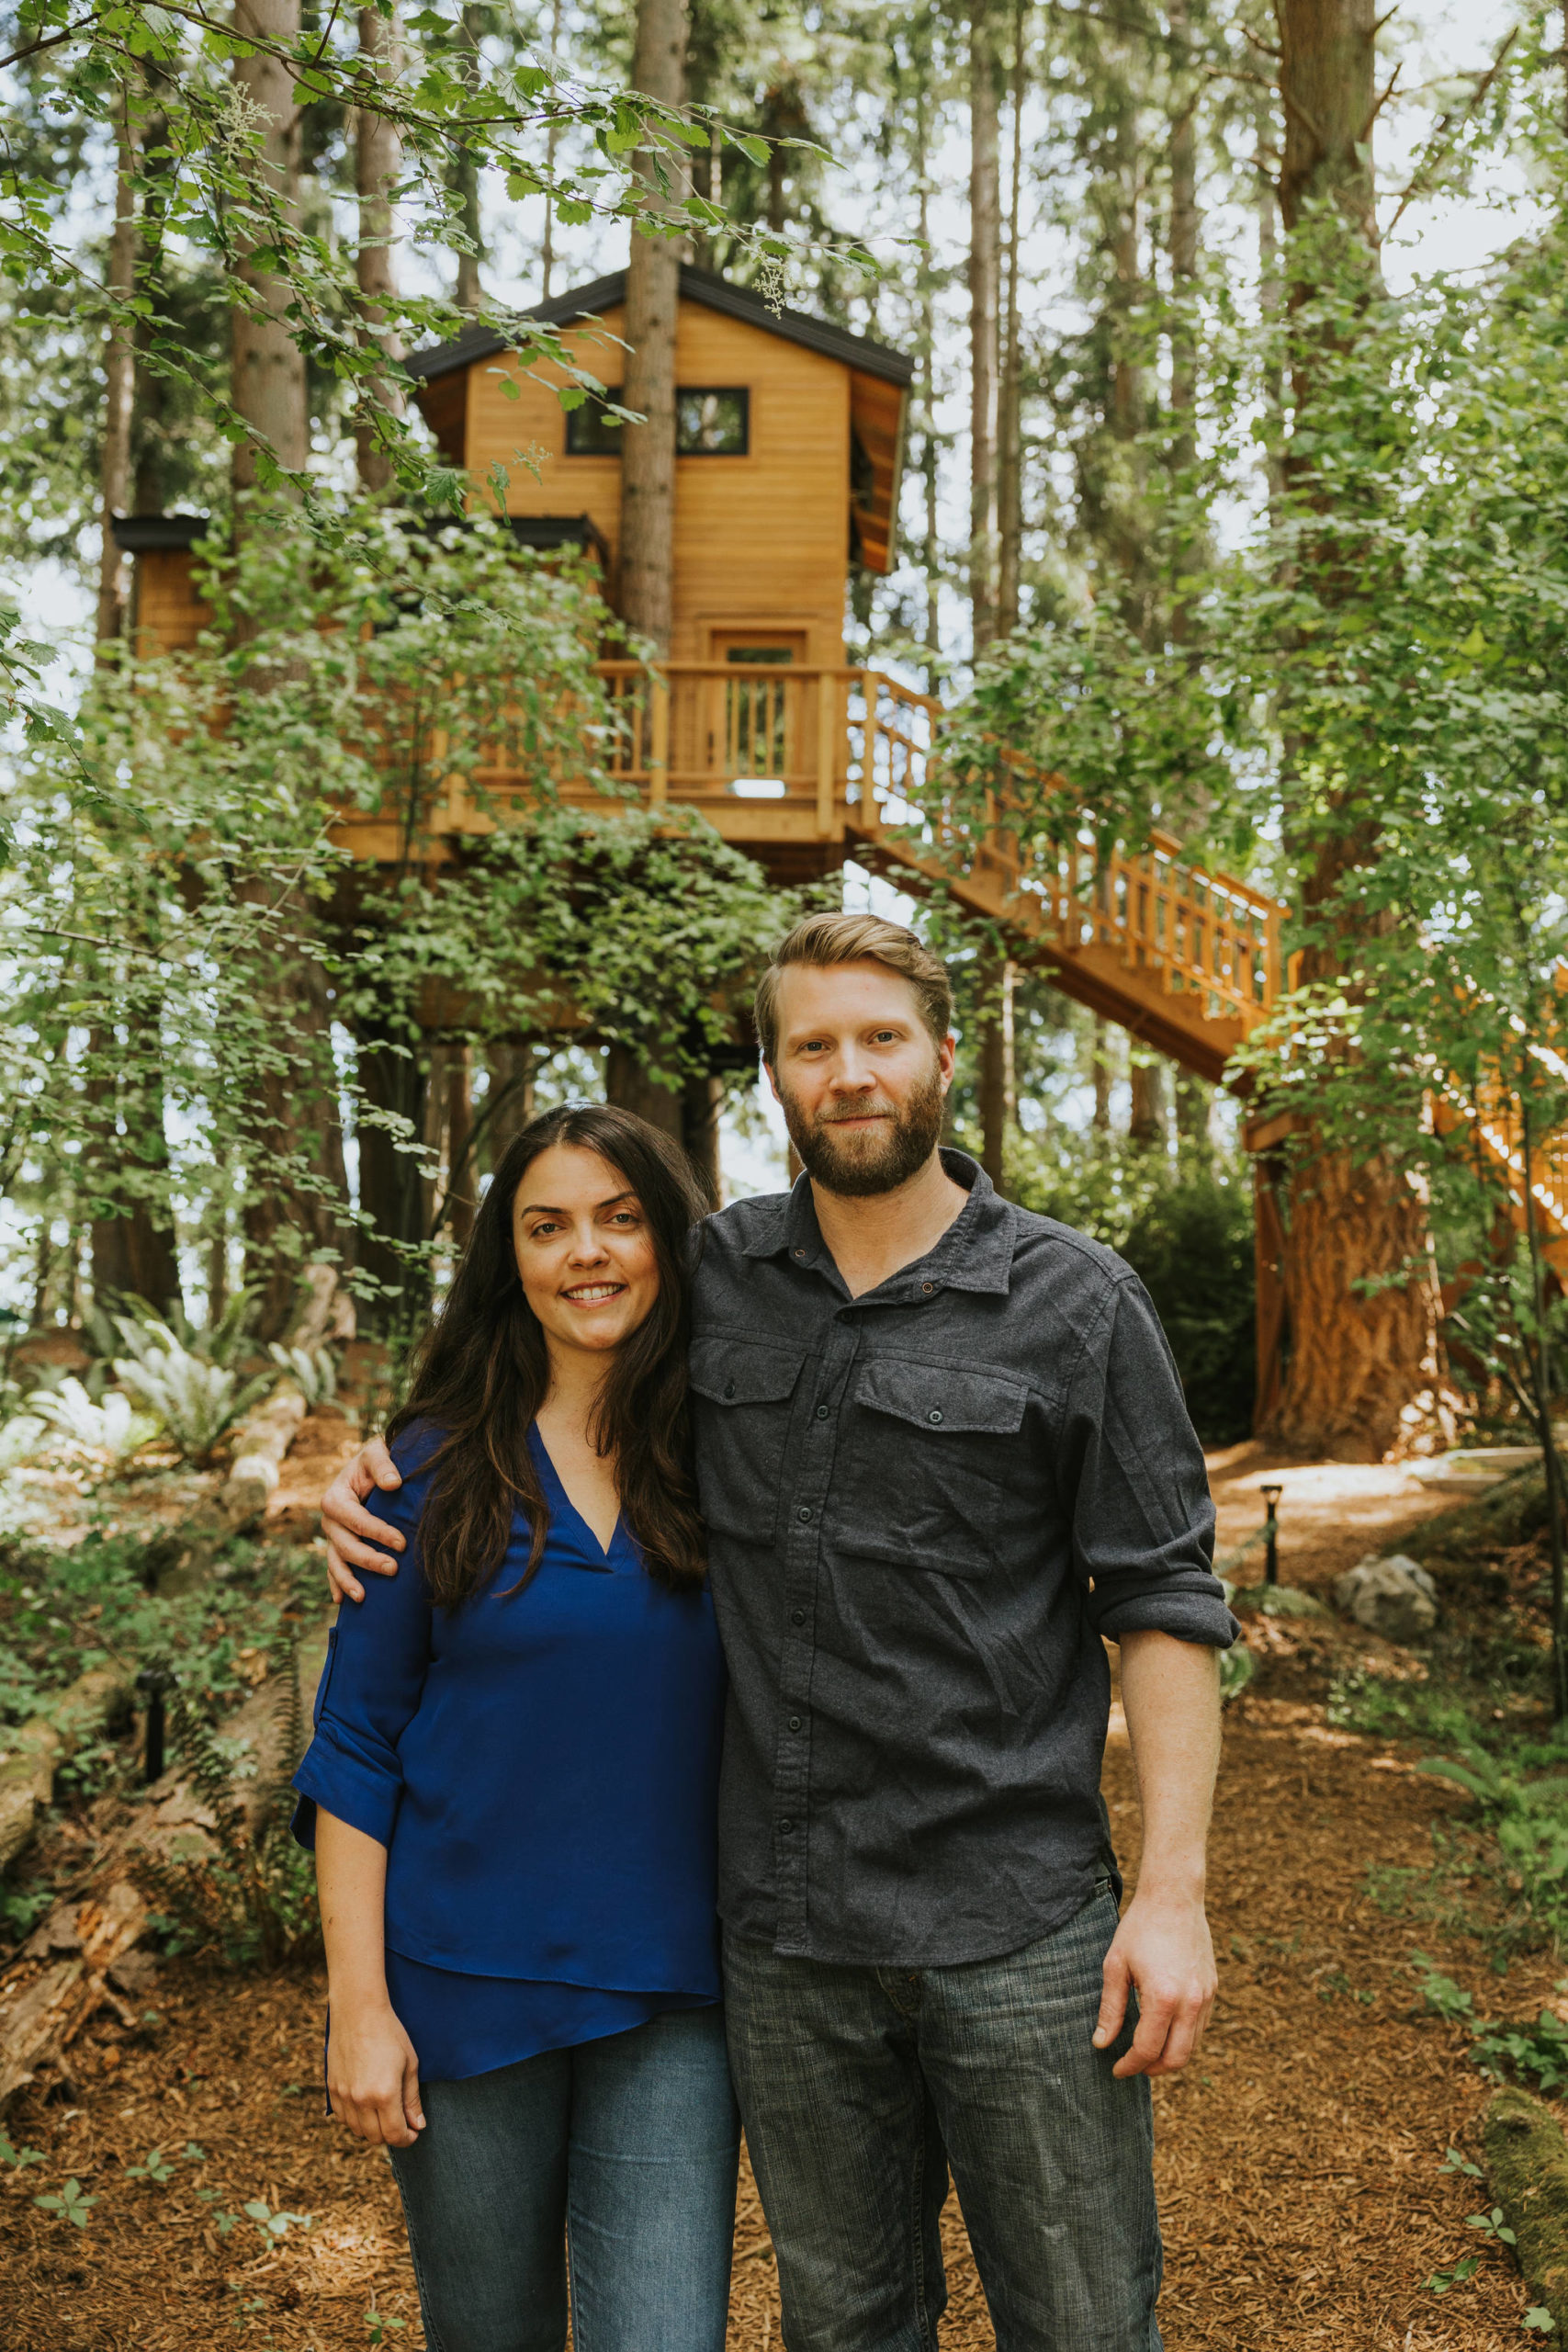 Tatiana Rocha and Max Lindsay-Thorsen and their COVID creation — a treehouse with all the modern amenities that has a view of Possession Point. (Photo by Bryton Wilson)